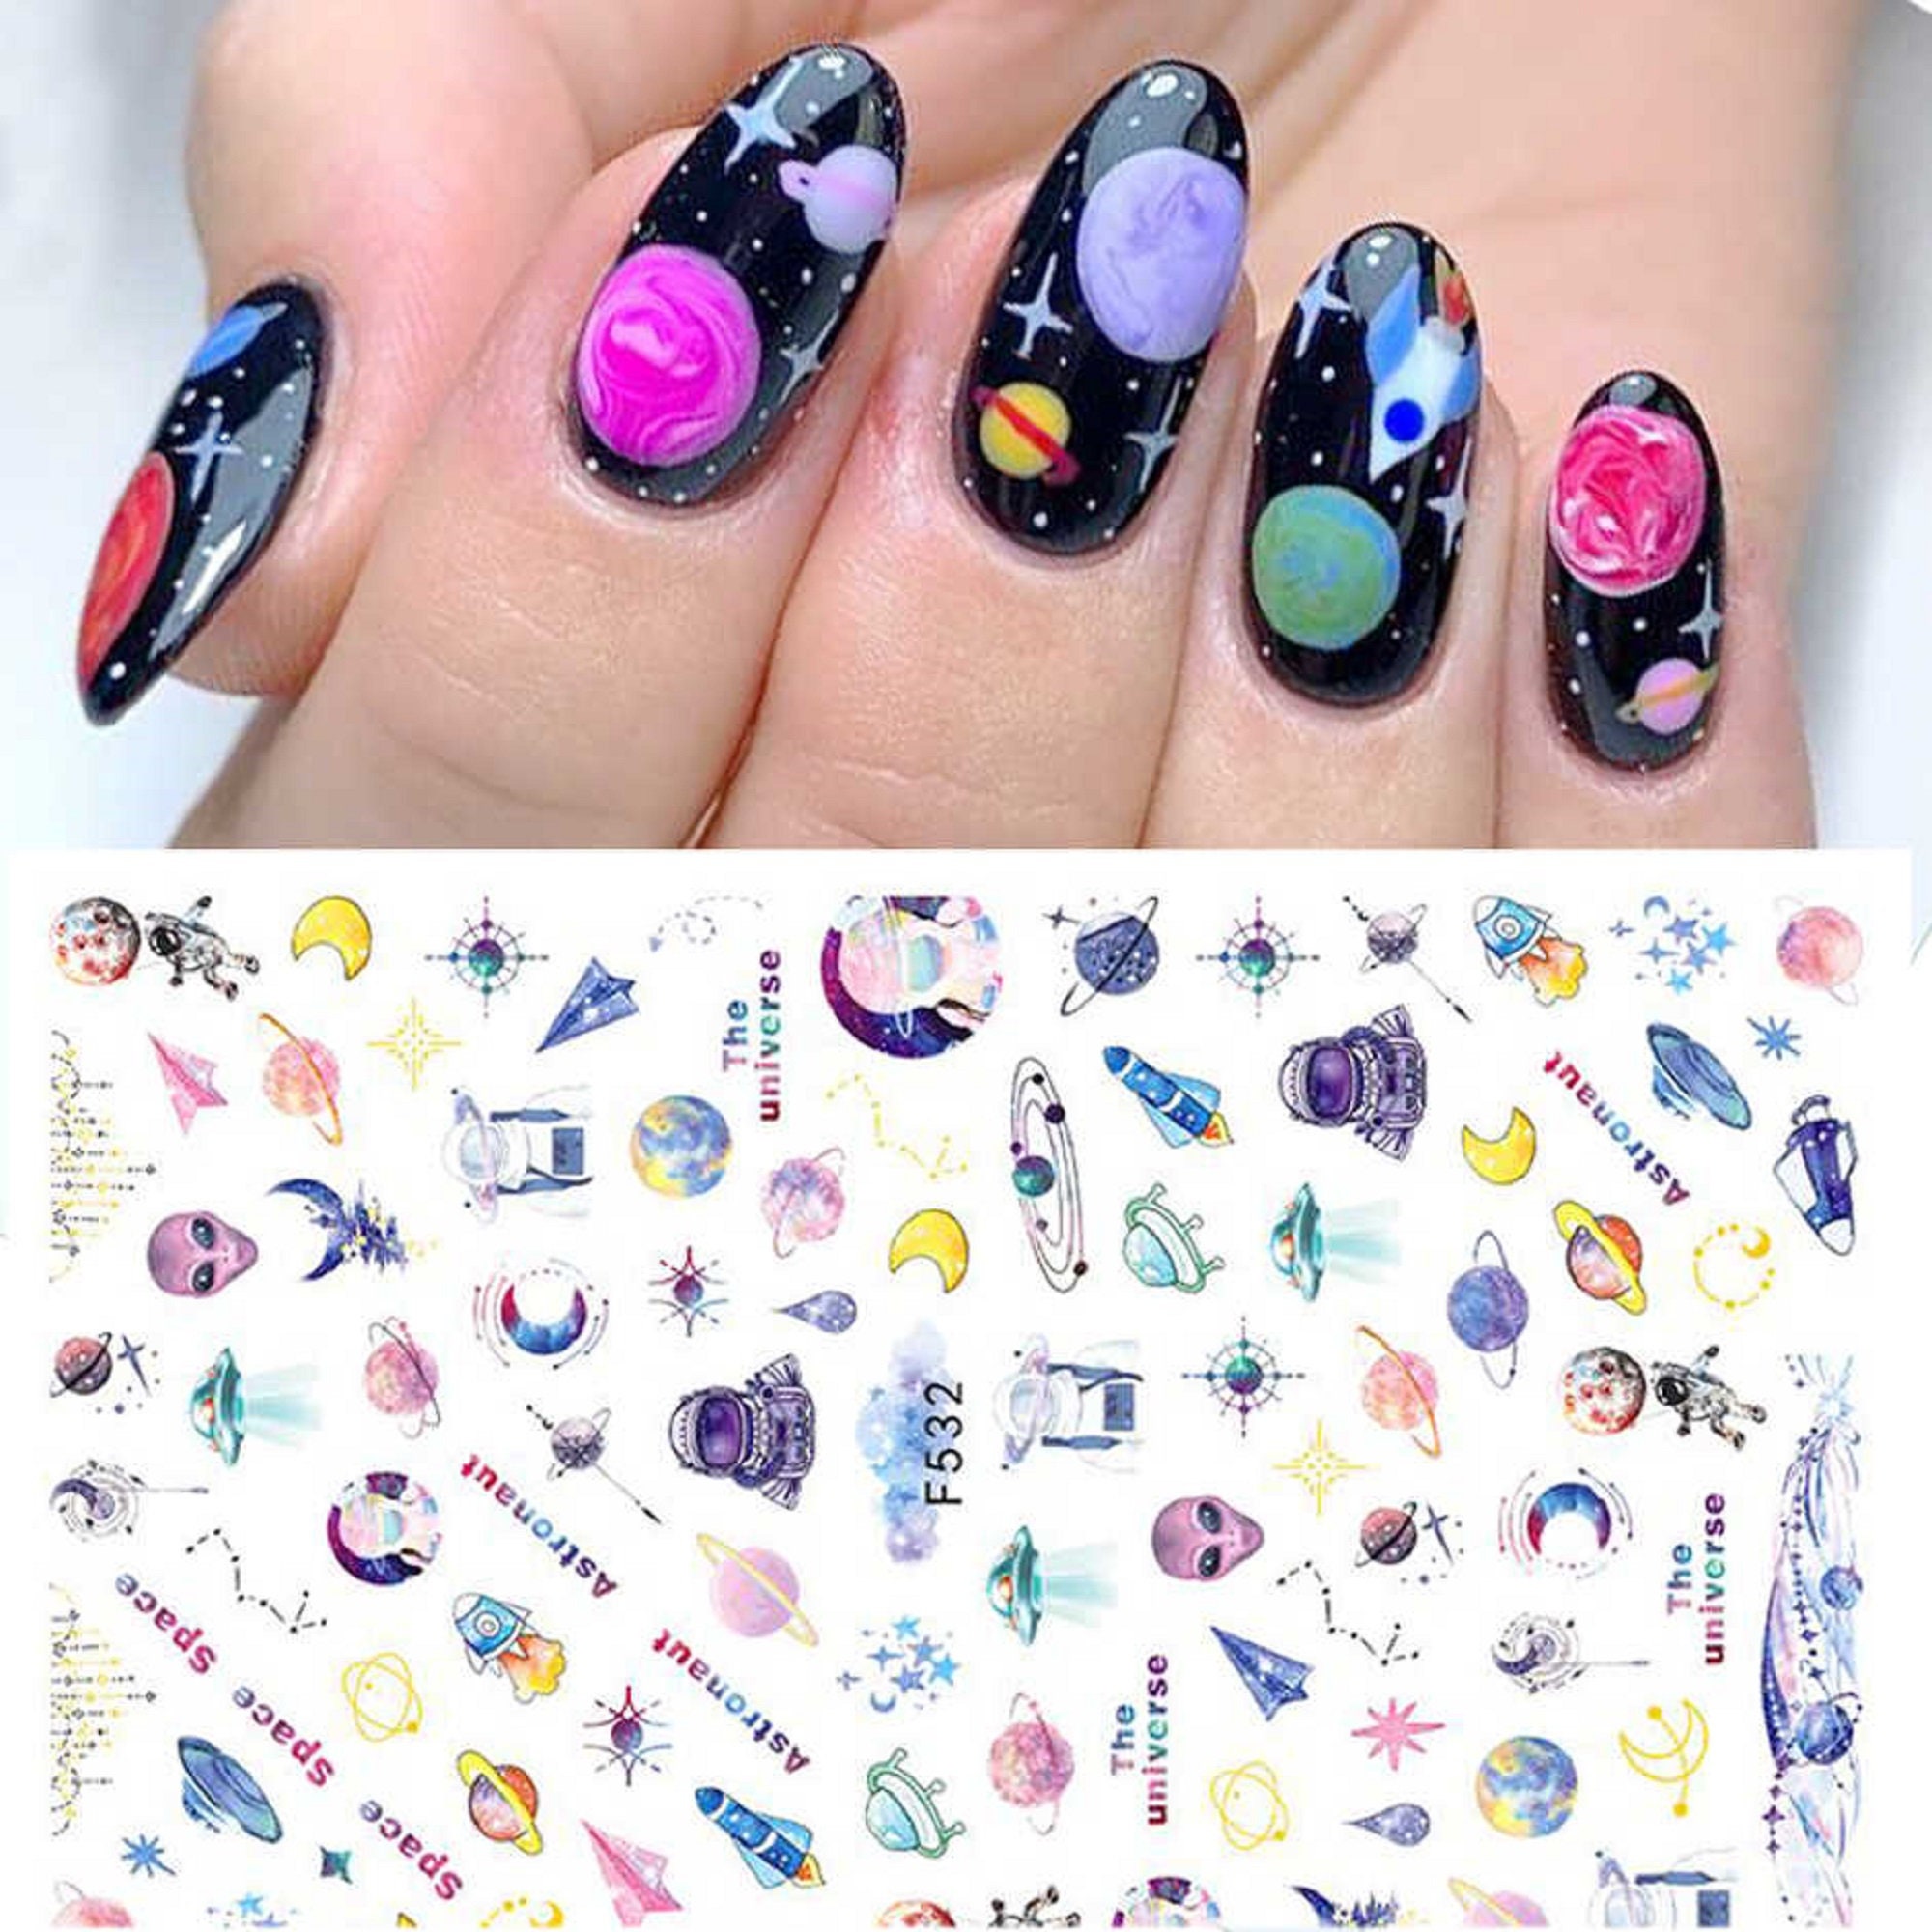 Nail Art Stickers Decals Transfers Planets Space Alien | Etsy